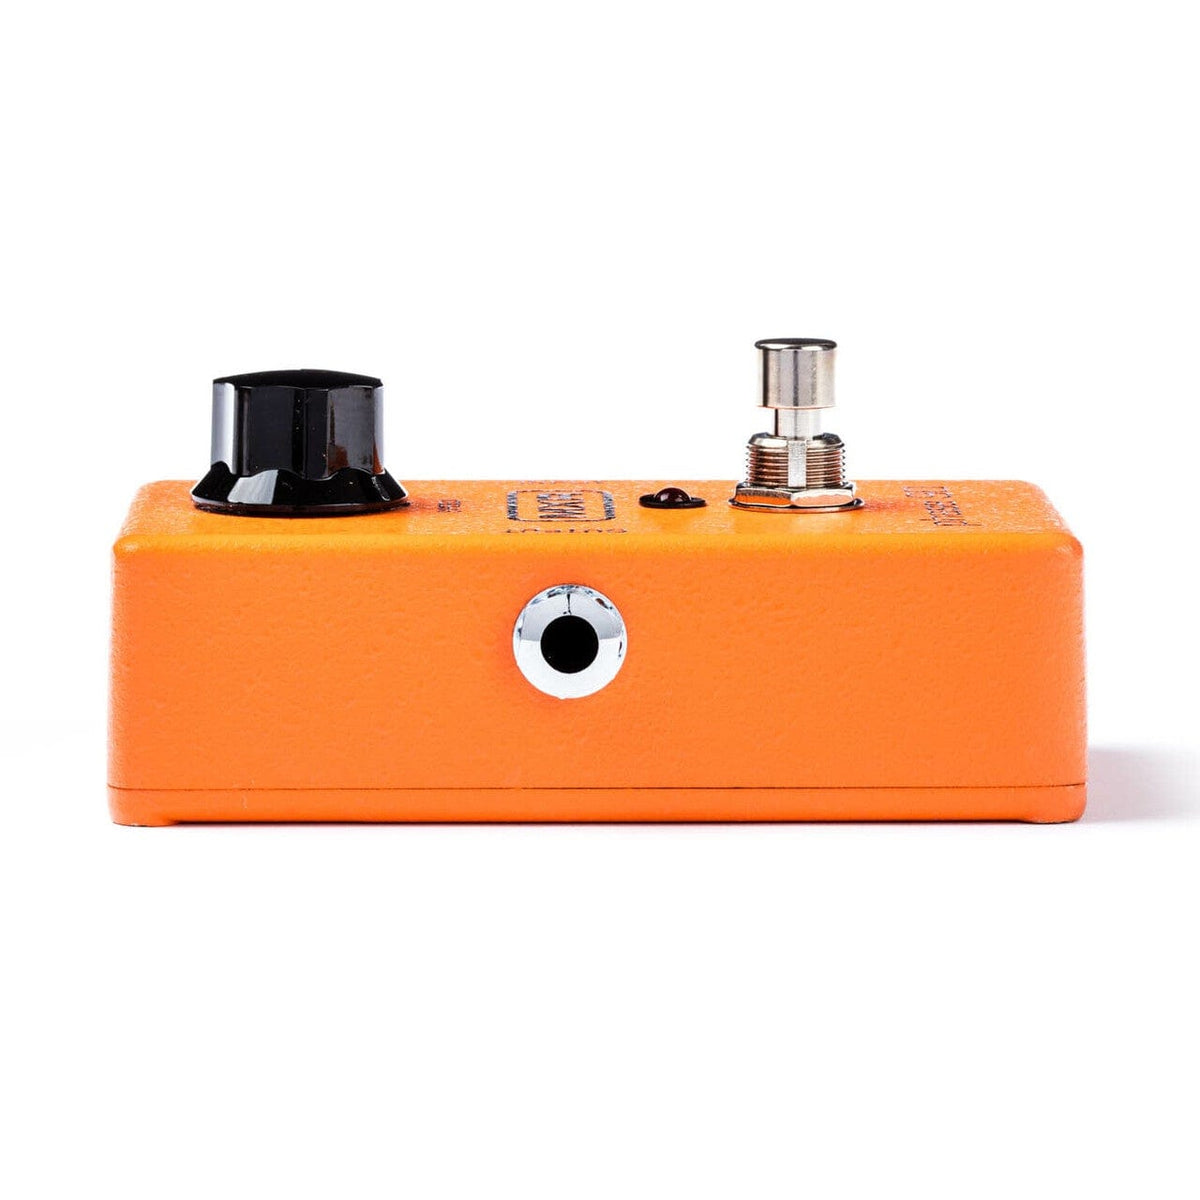 MXR Phase 90 Effects Pedal Guitars on Main